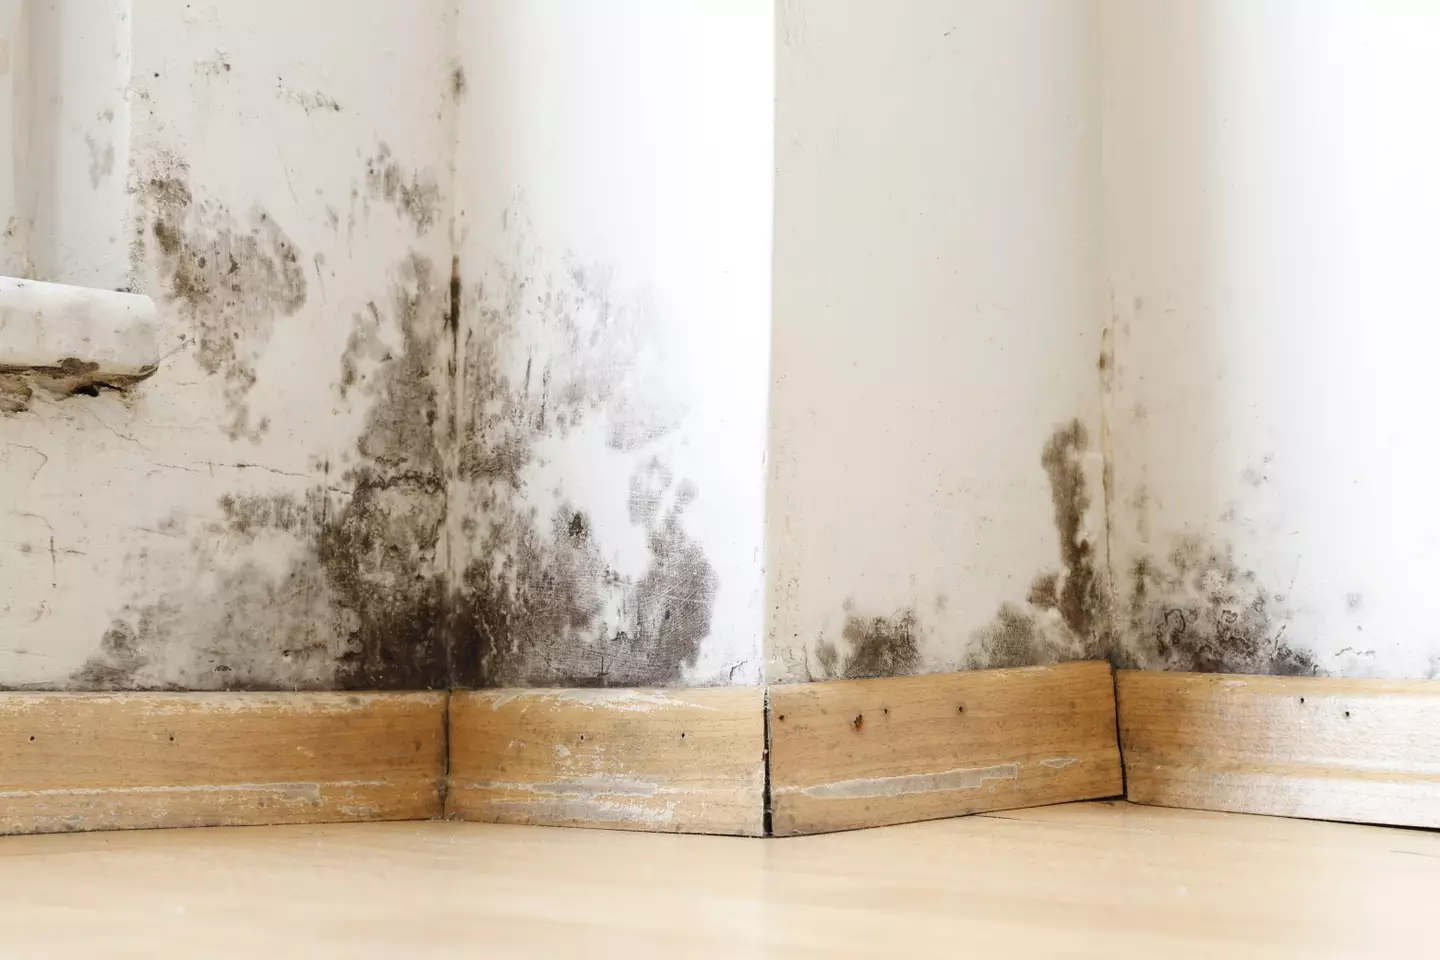 Mould can cause serious problems for a person's health.